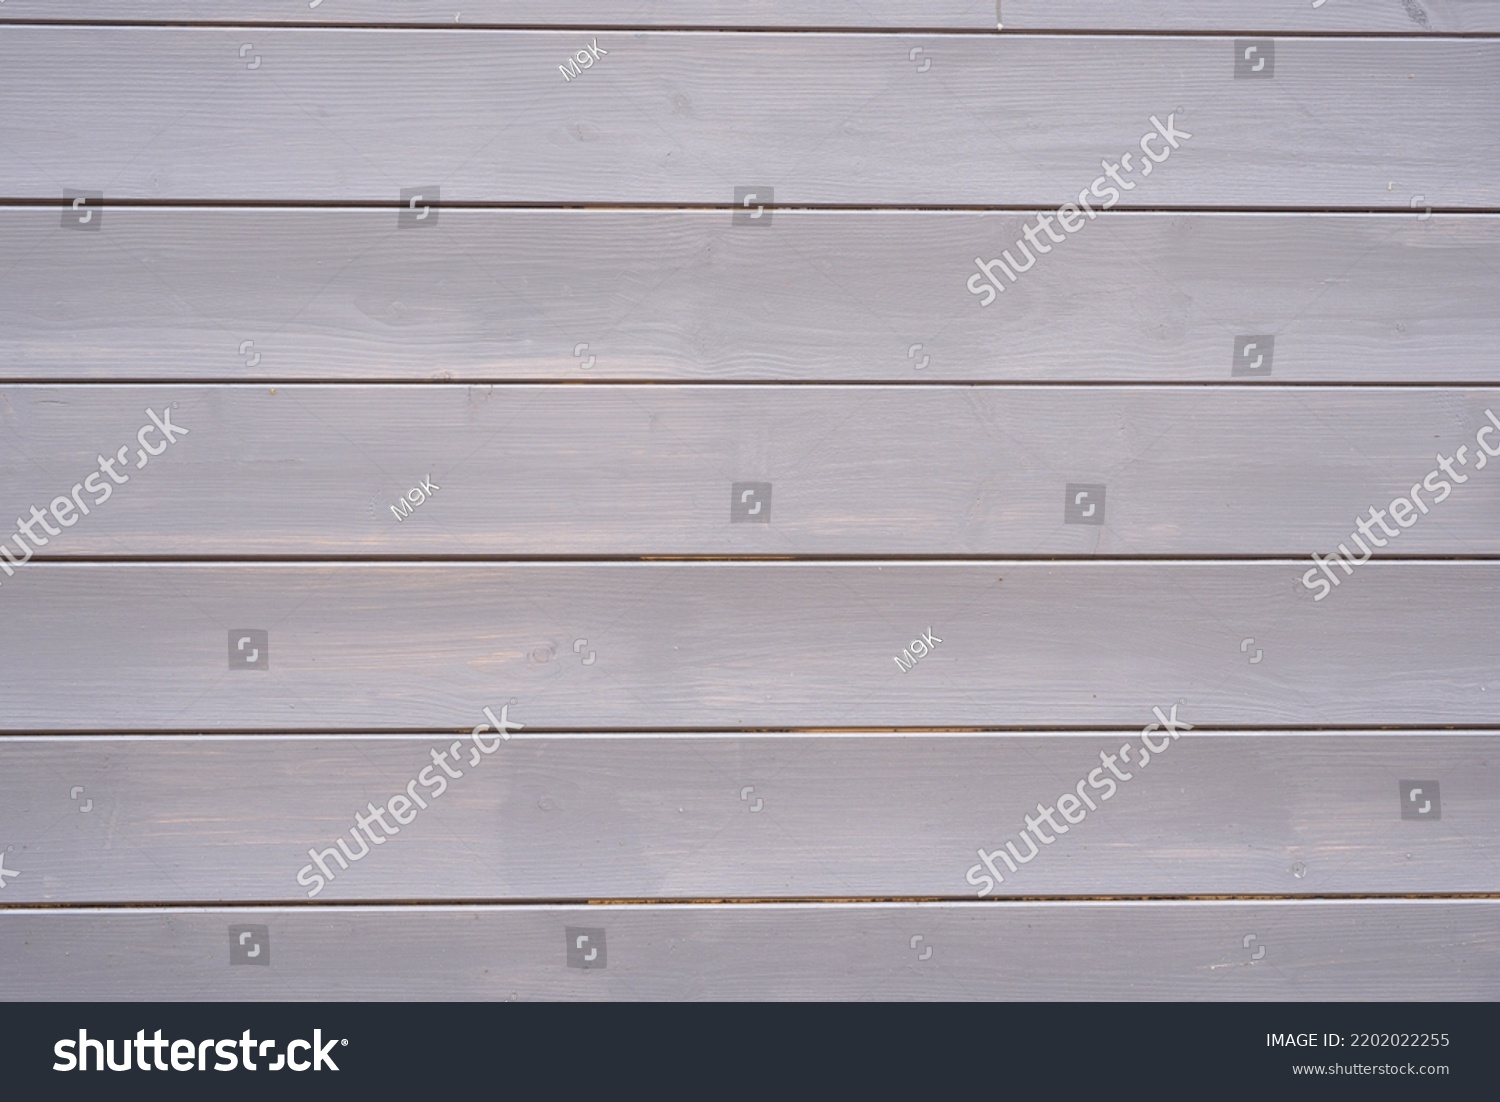 Wooden boards painted with grey paint. Background Texture. Colorful Plank Wall. Gray colored background. wooden wall with horizontal planks. background for design. High quality photo. Ashen Banner. #2202022255